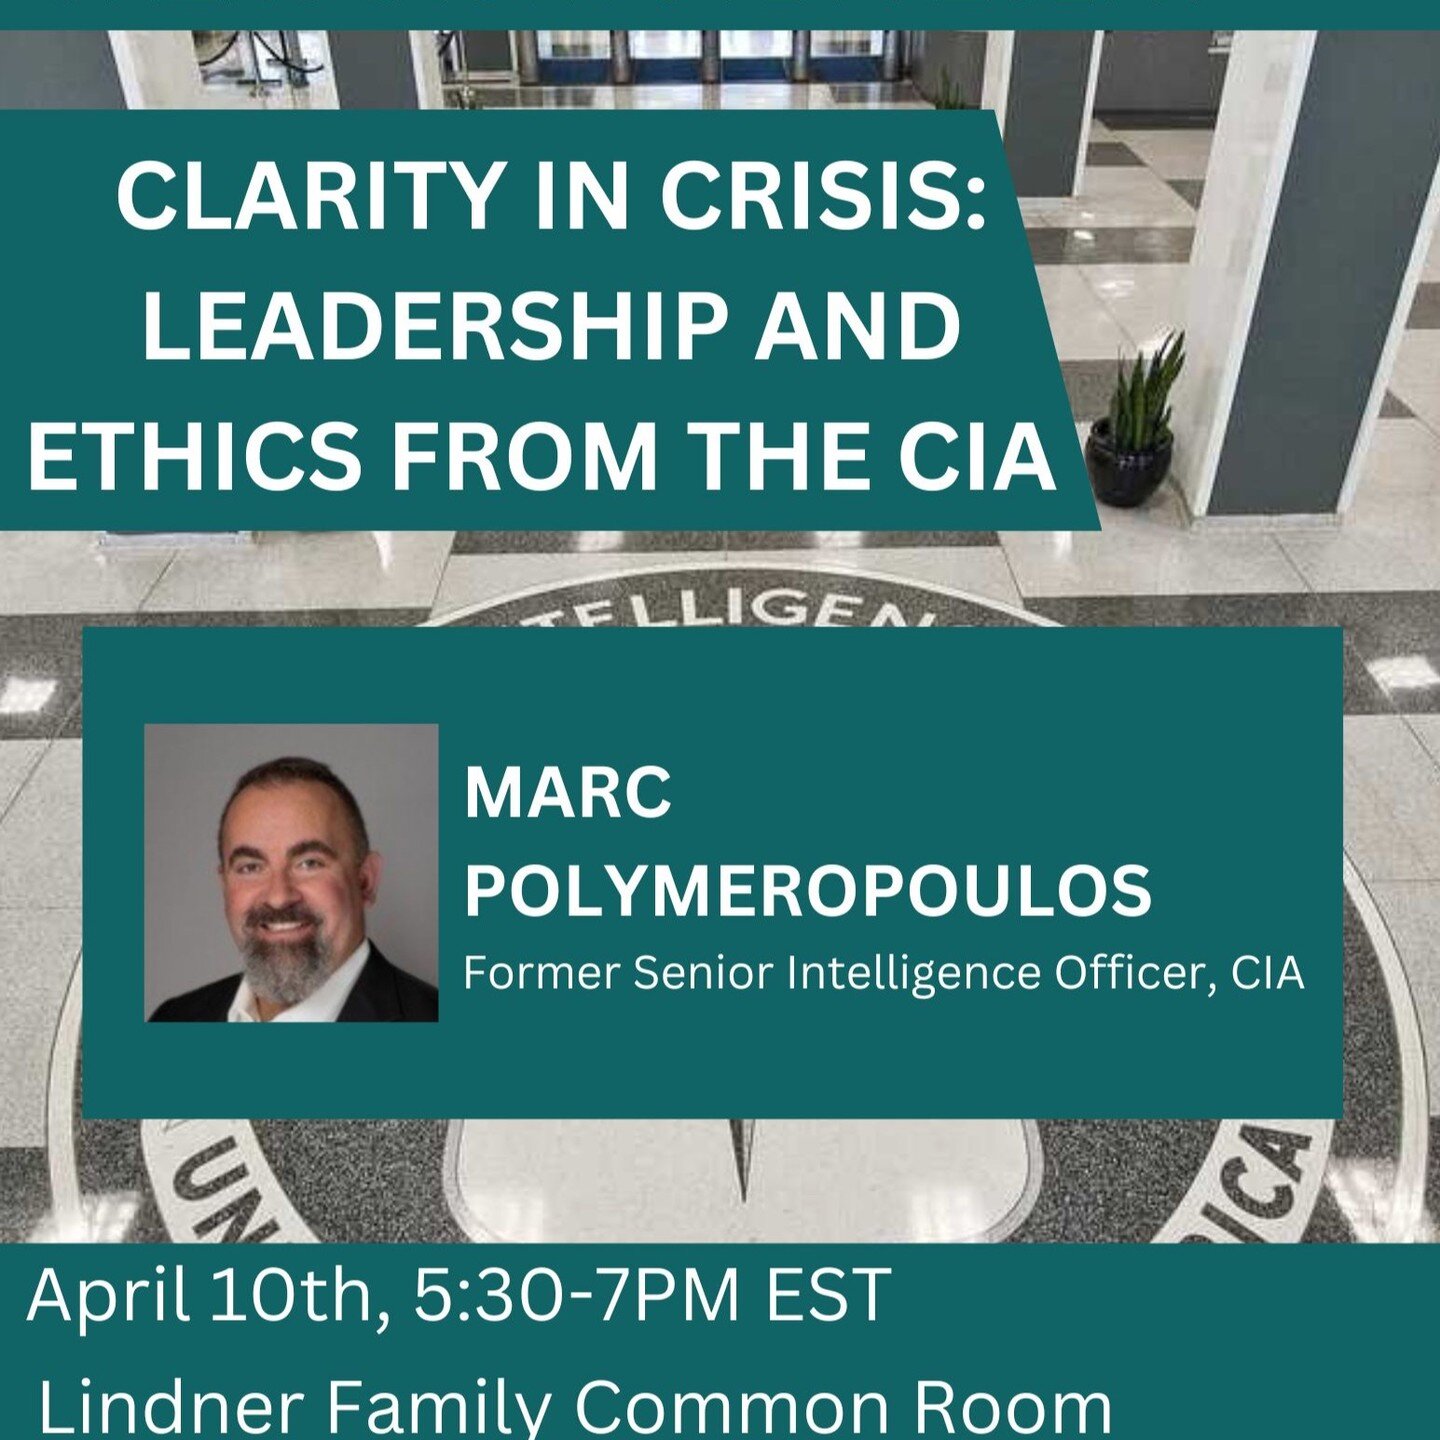 Please join us for &quot;Clarity in Crisis: Leadership and Ethics from the CIA,&quot; organized by @dpe.gwu Featuring Marc Polymeropoulos, a former CIA senior intelligence officer, the event will discuss the CIA and lessons to be learned from its lea